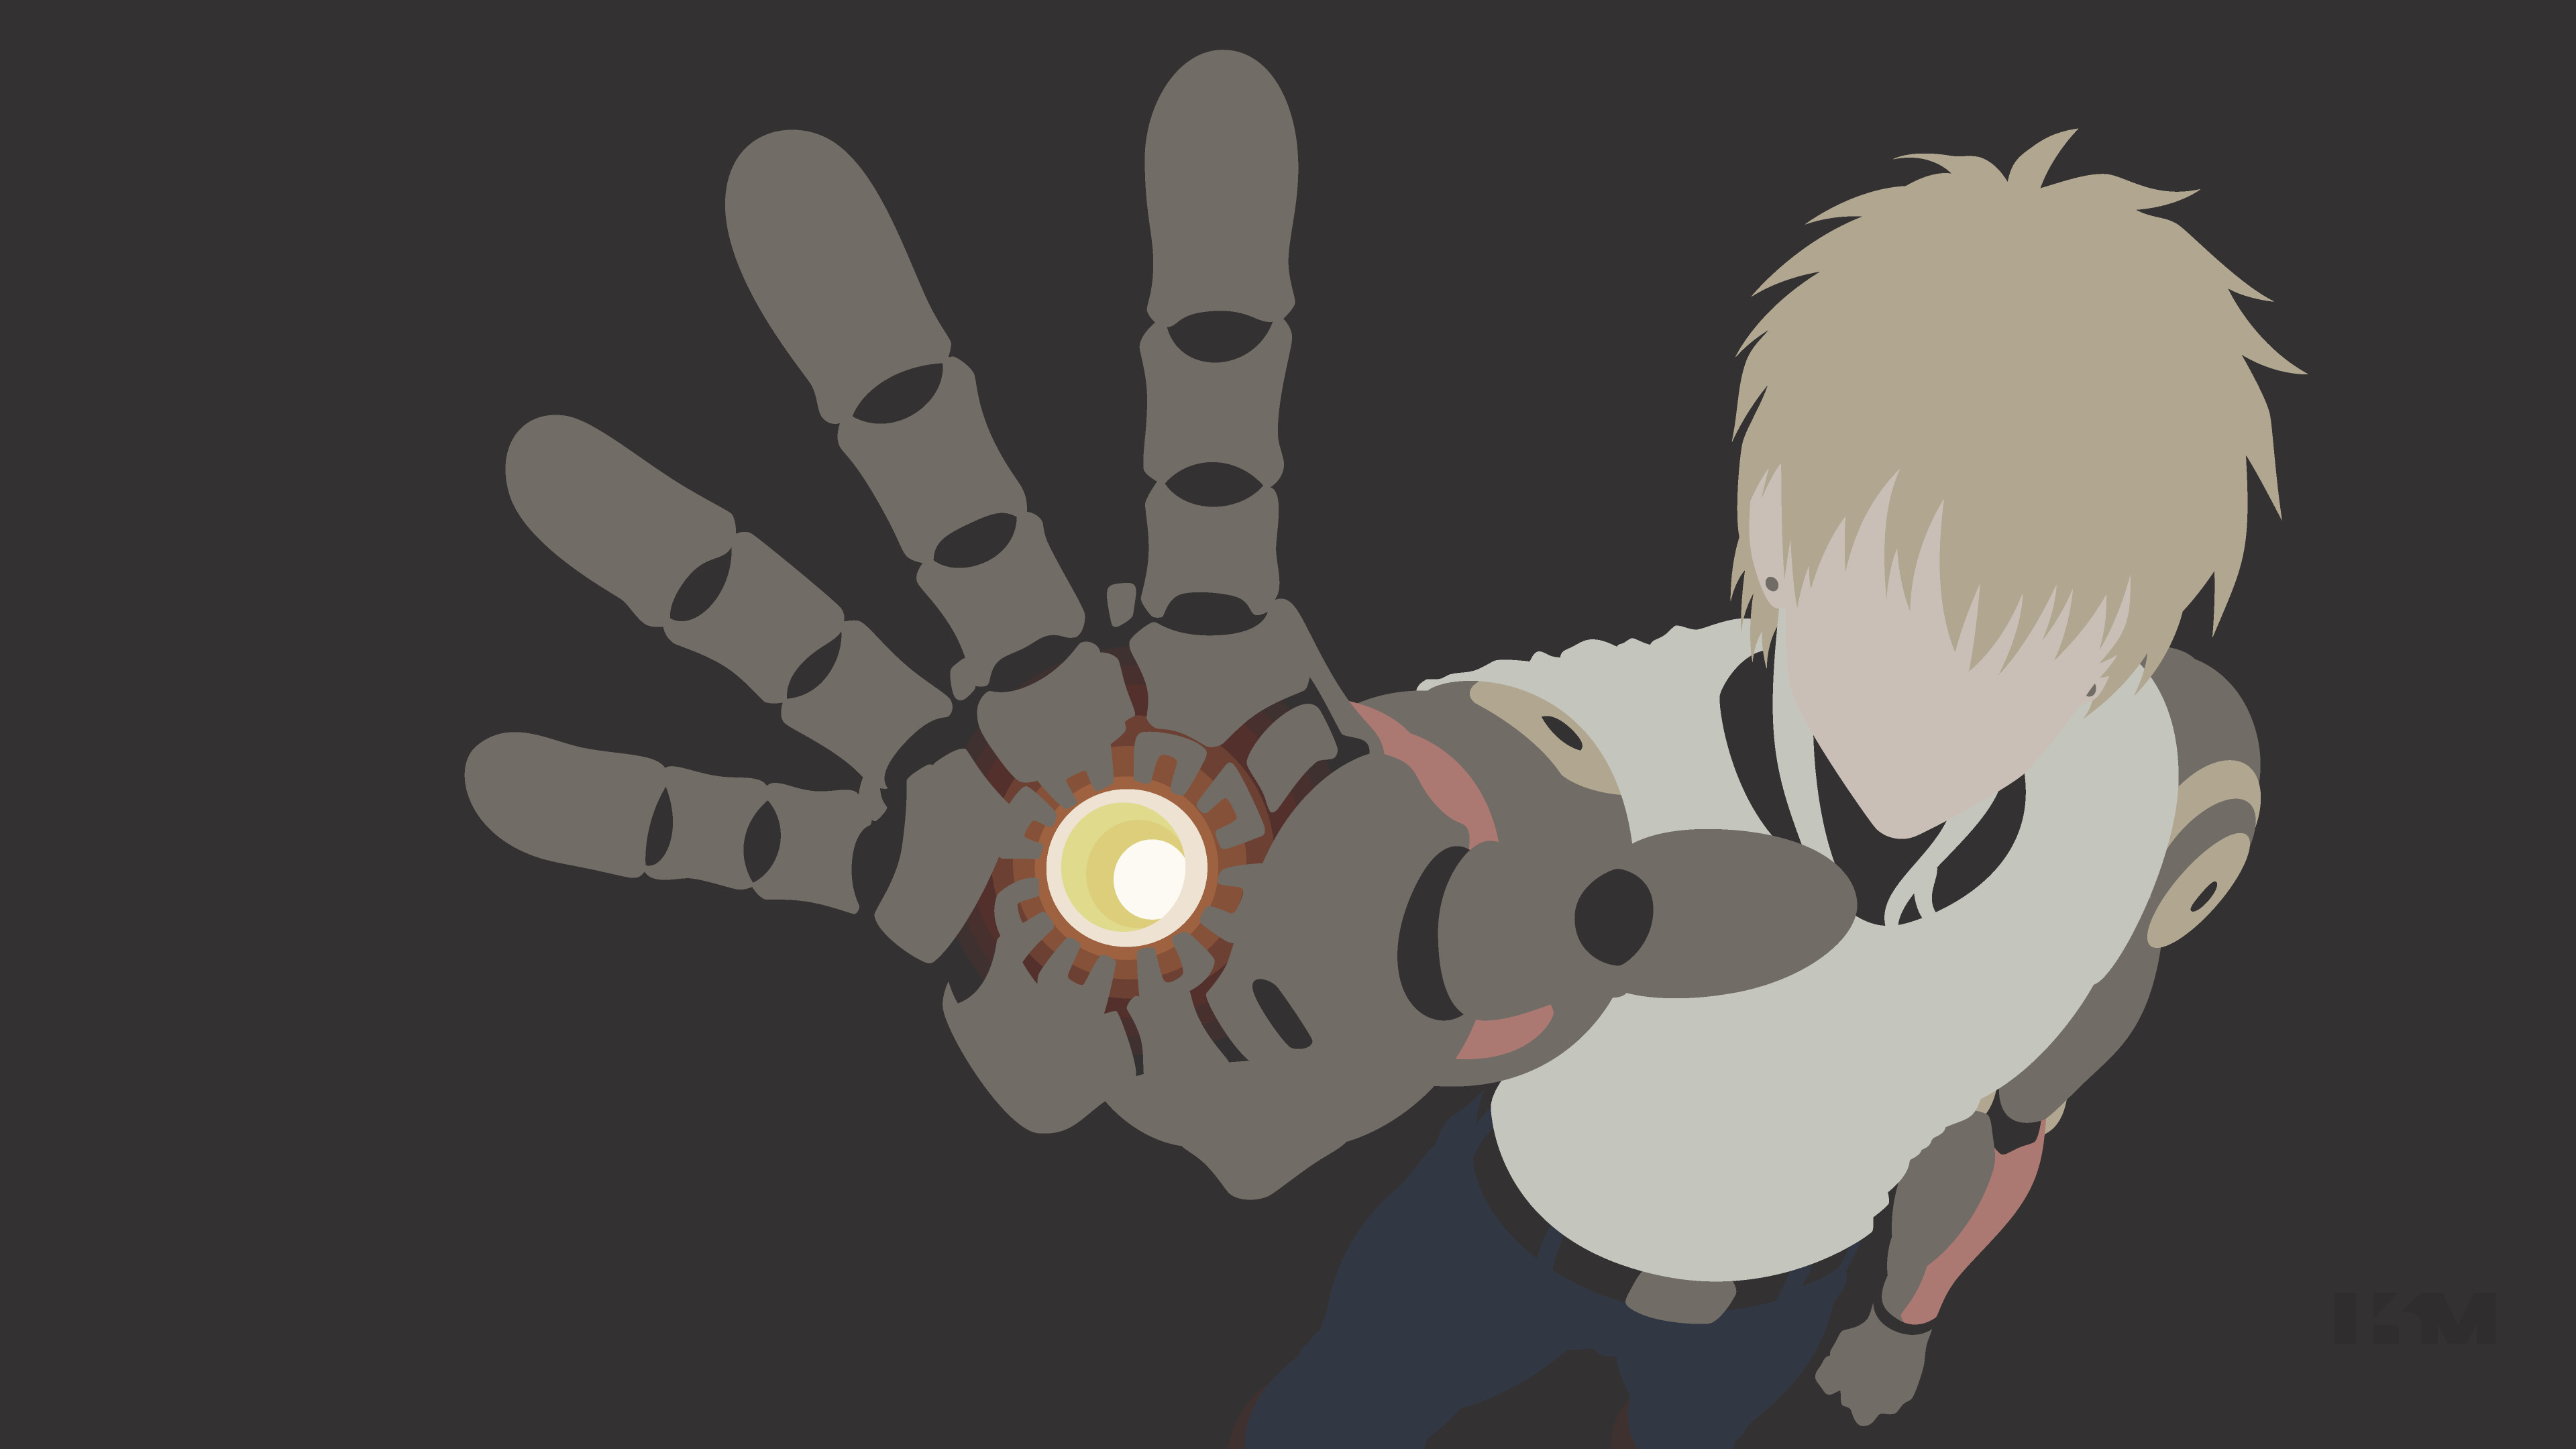 3840x2160 One Punch Man Genos Images 6403 - HD Wallpapers Site